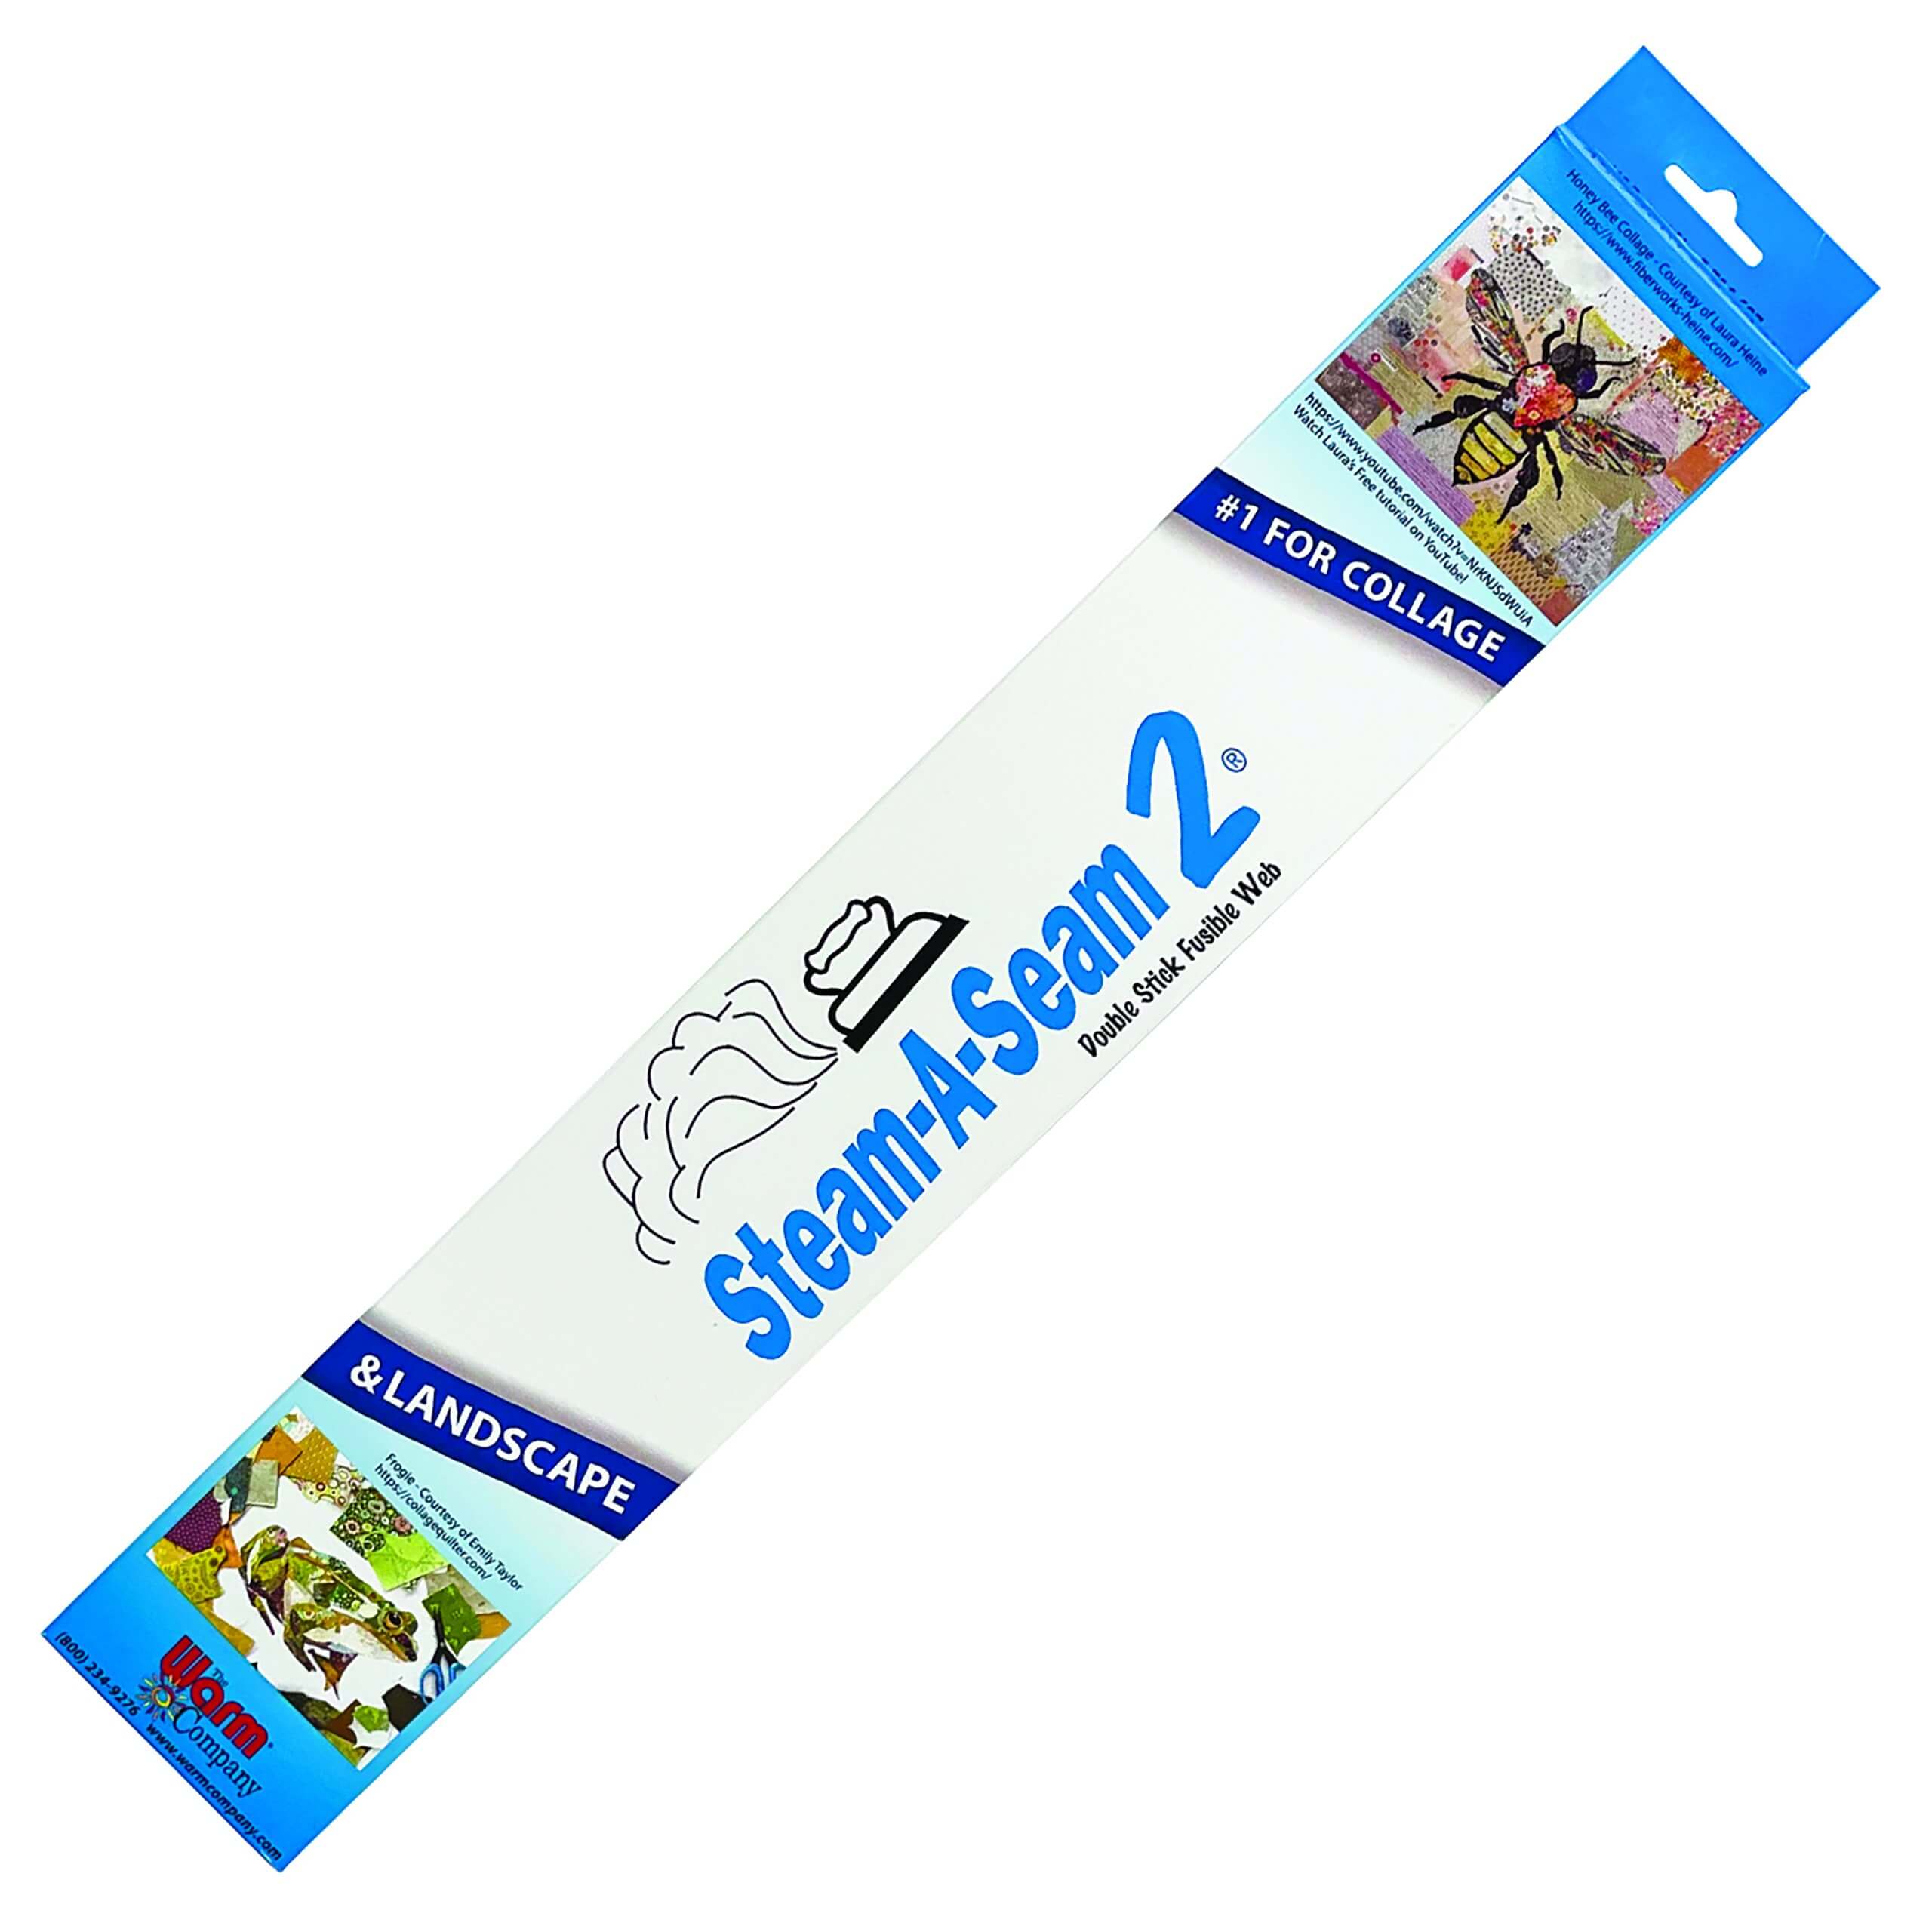 Steam-a-seam 2 package of Five, 9 X 12 Sheets 